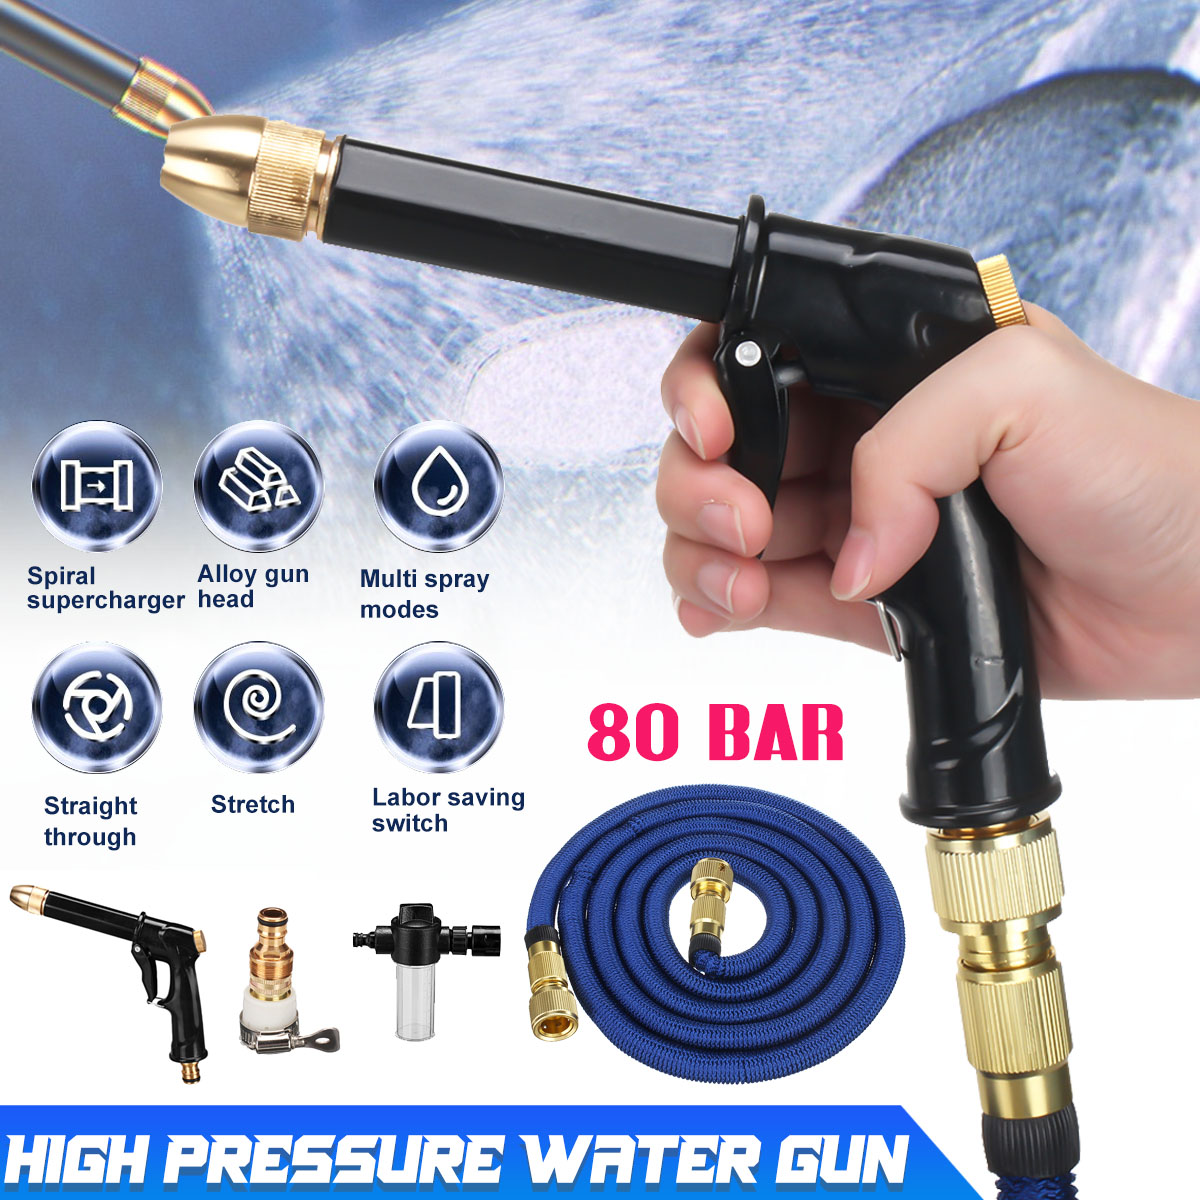 Portable-Cordless-Car-Washer-High-Pressure-Car-Household-Washer-Cleaner-Guns-Pumps-Tool-with-Accesso-1920844-1